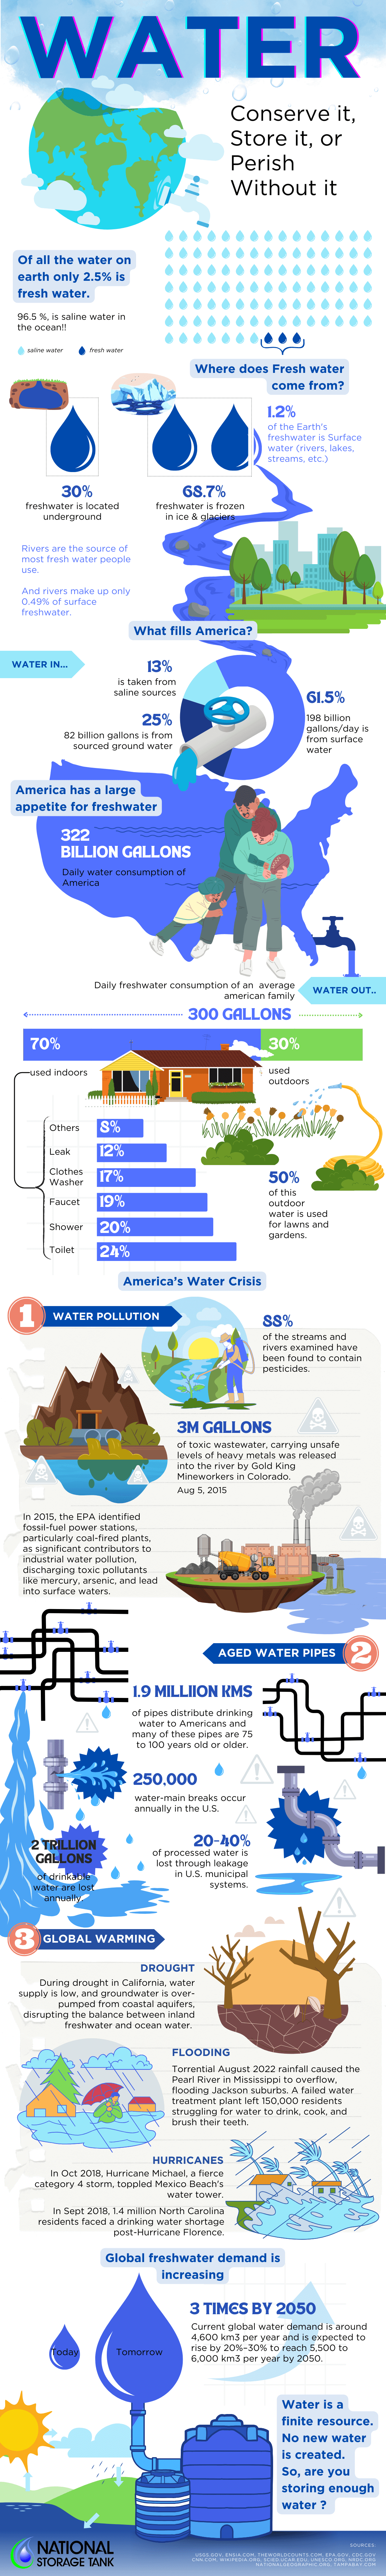 Water-Conservation